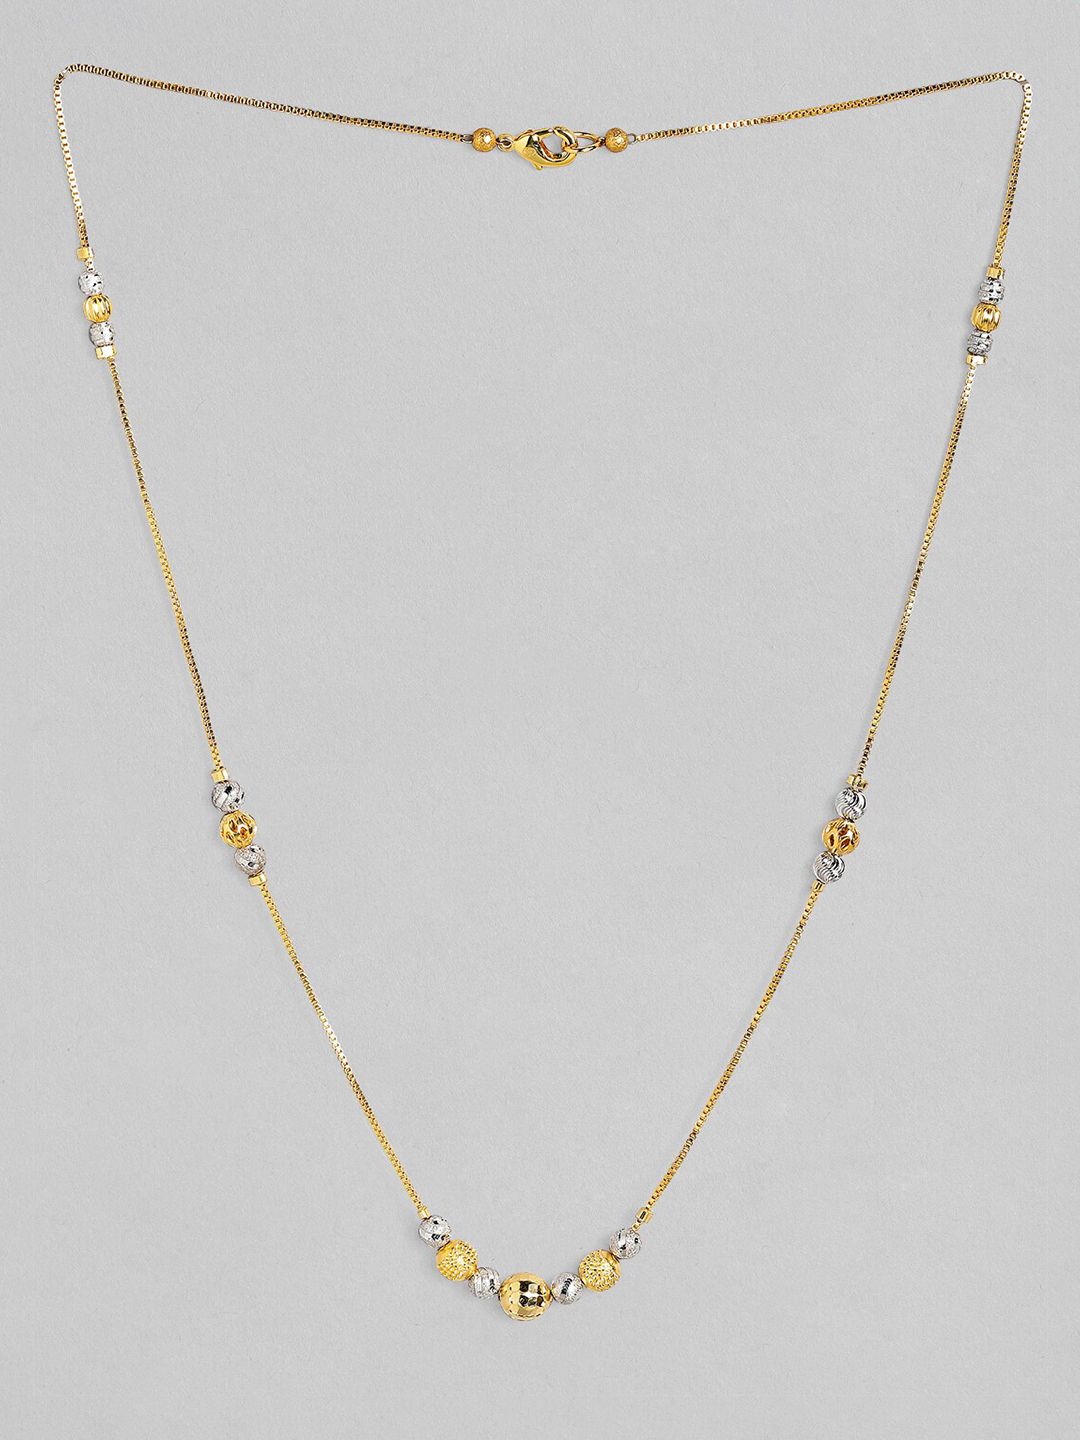 Rubans Gold-Toned & Silver-Toned Gold-Plated Beaded Necklace Price in India